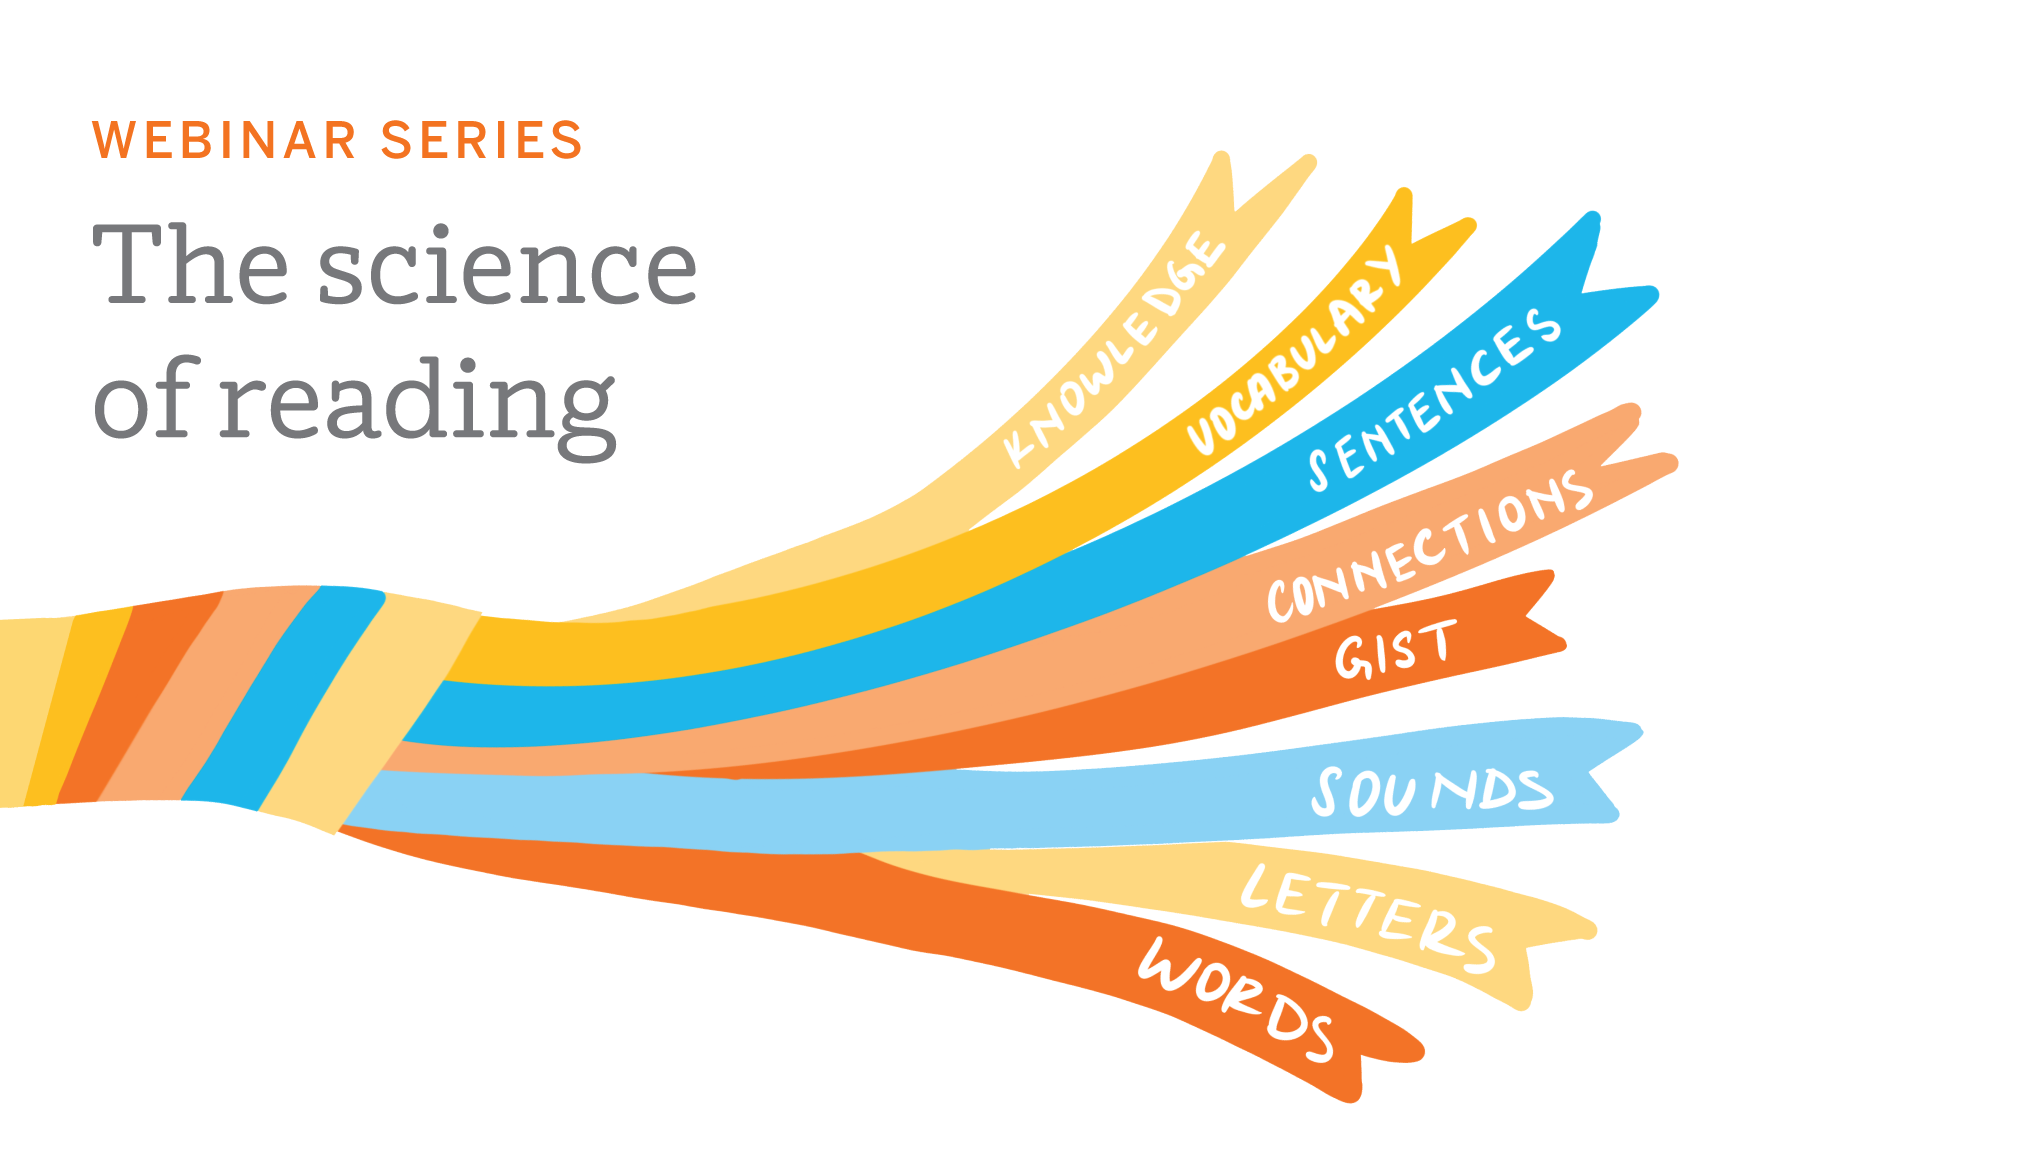 Join experts on the Science of Reading for a free webinar.